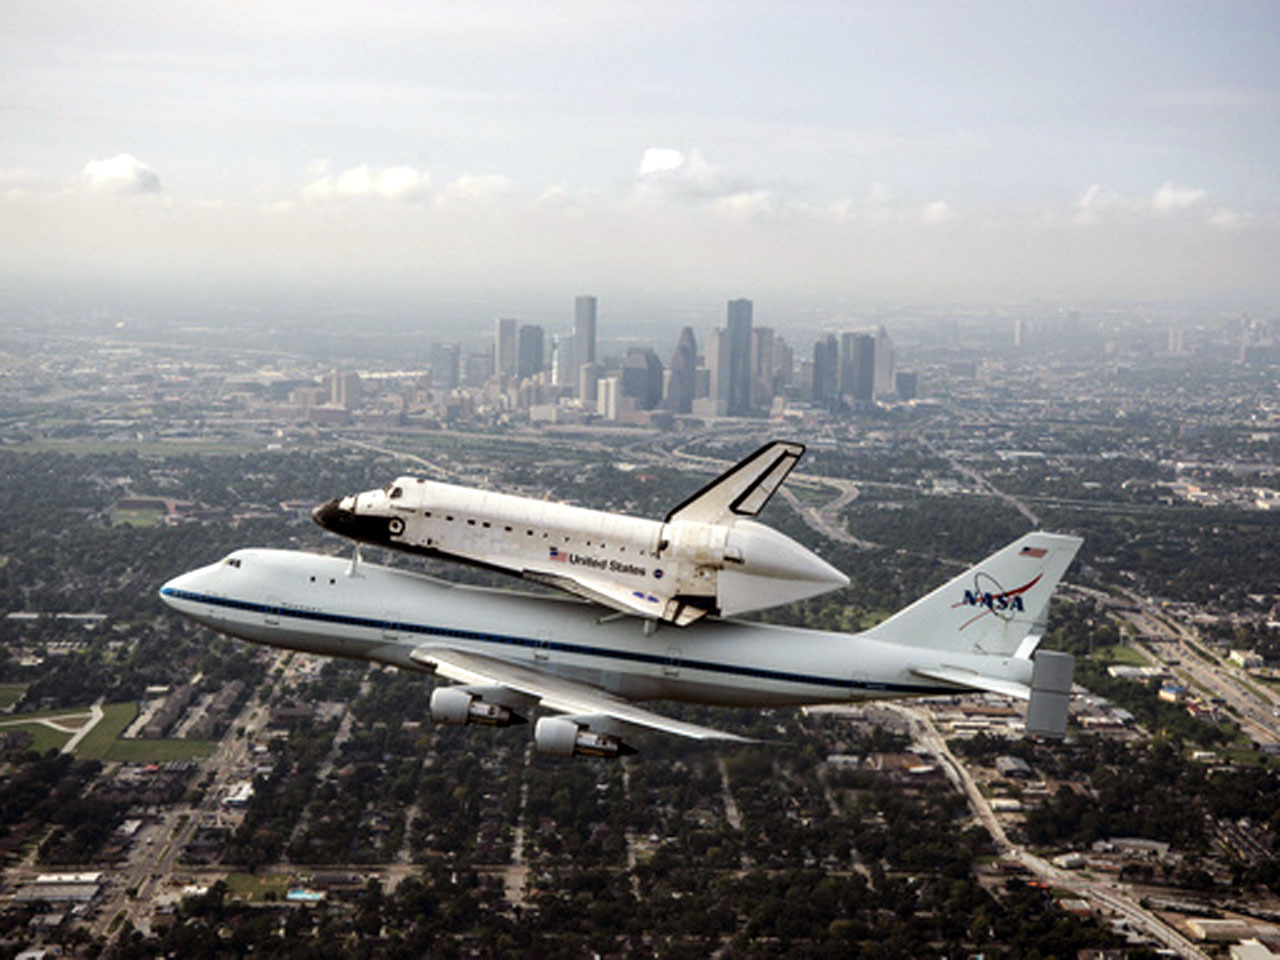 space shuttle endeavour cost